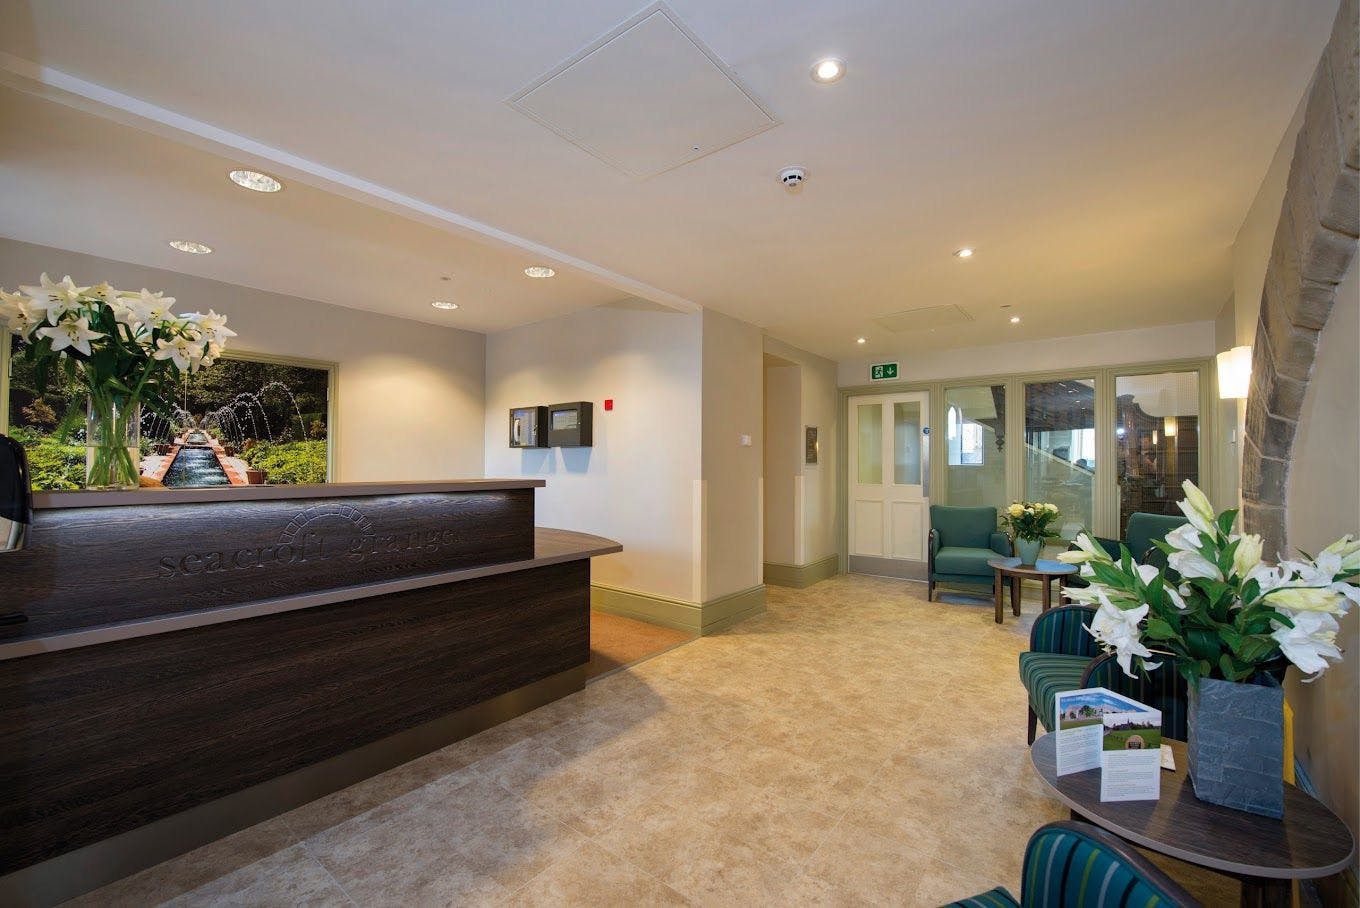 Reception of Seacroft Grange care home in Leeds, Yorkshire